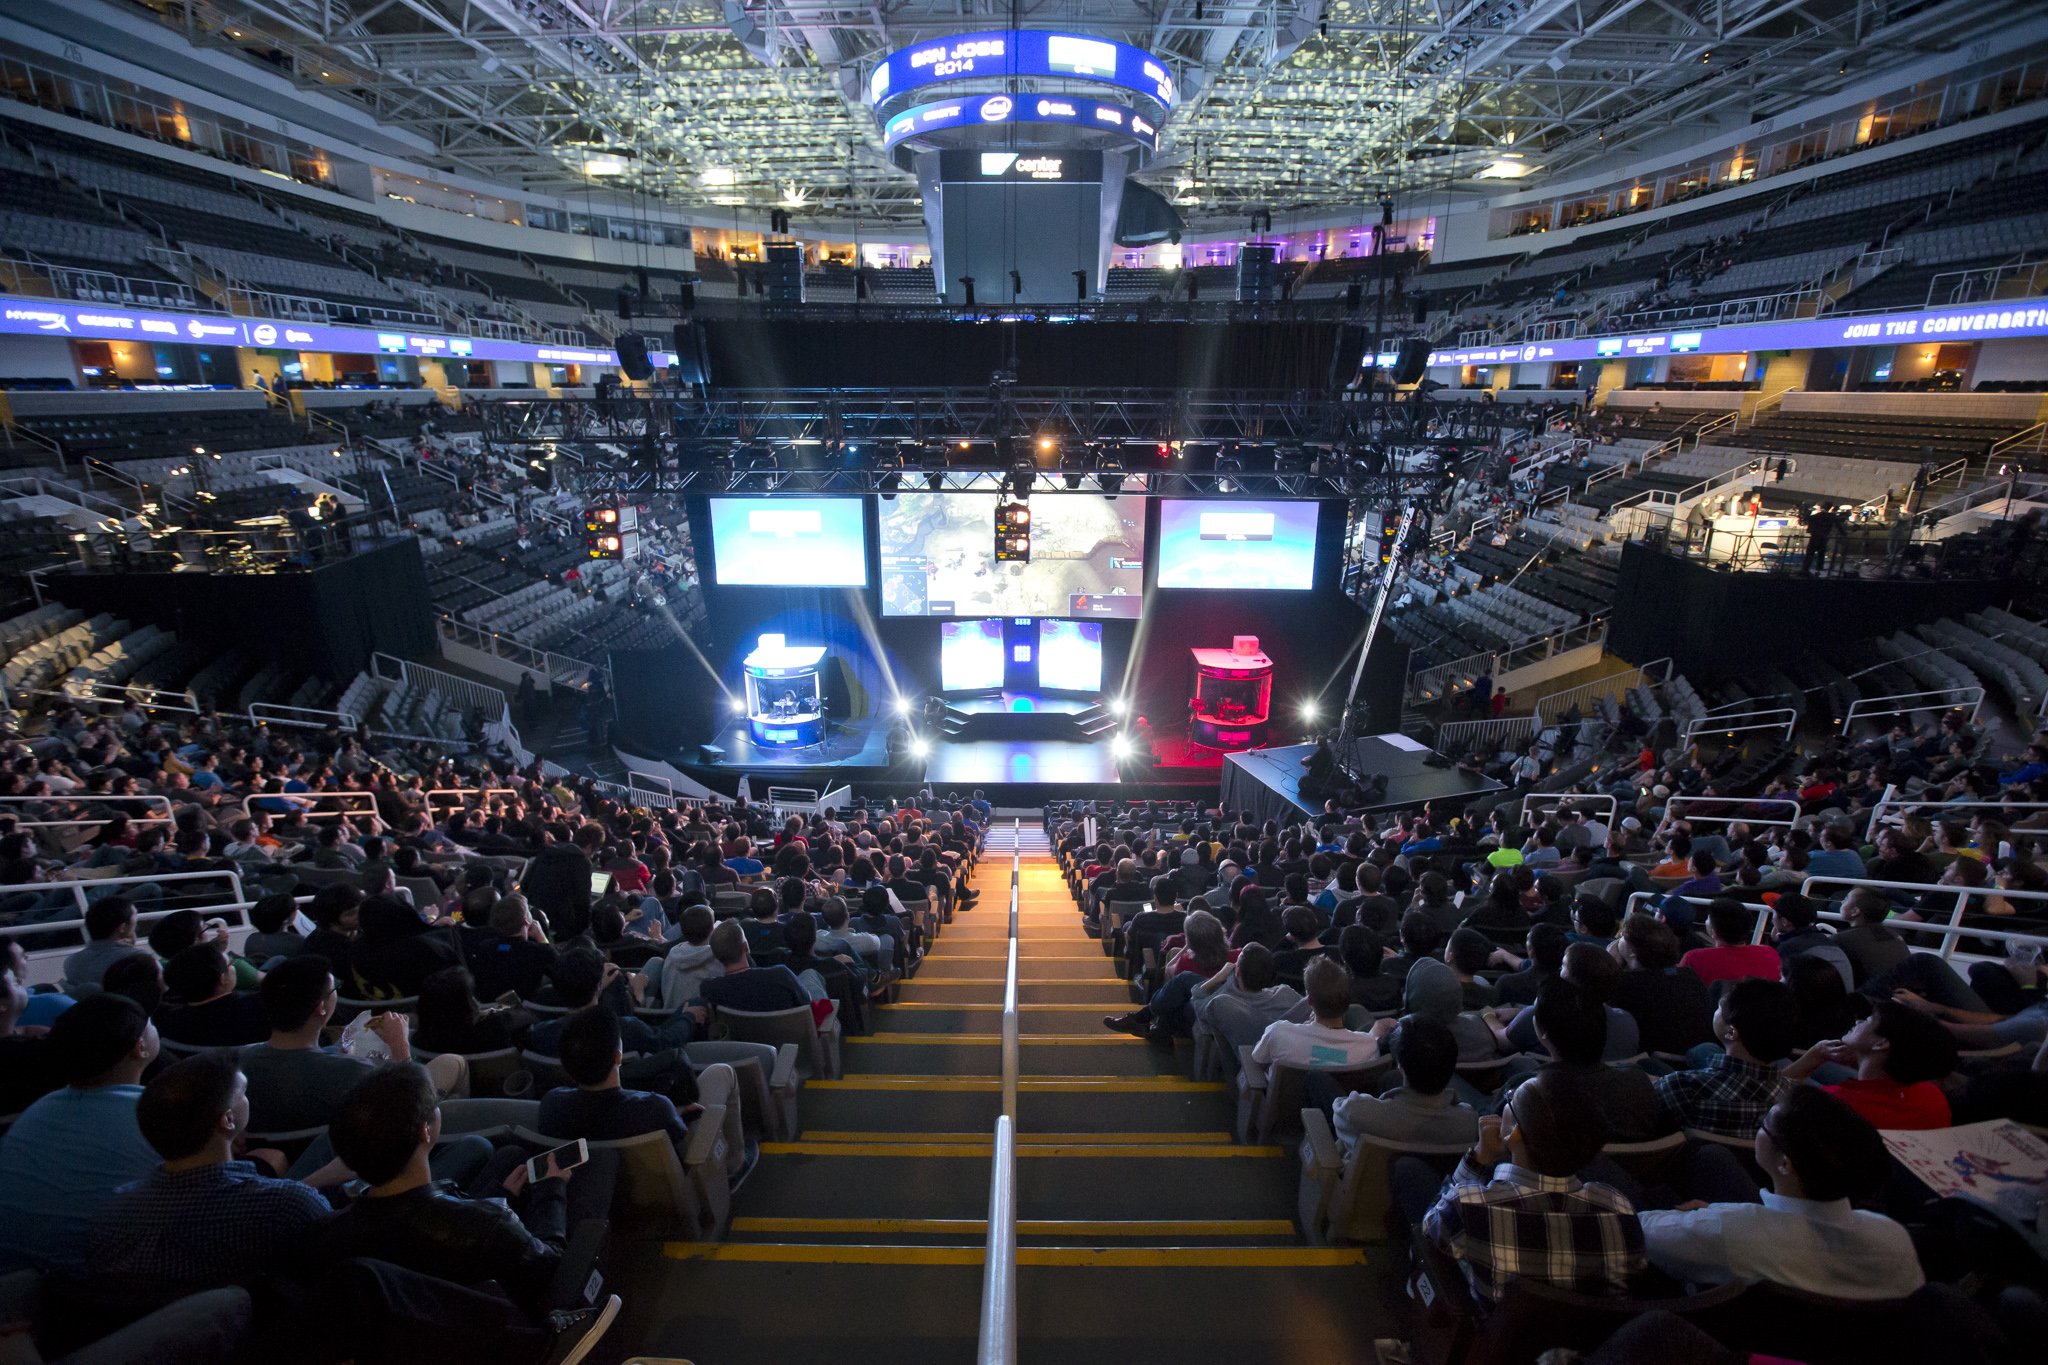 How to become a Professional Gamer and Make Money Gaming